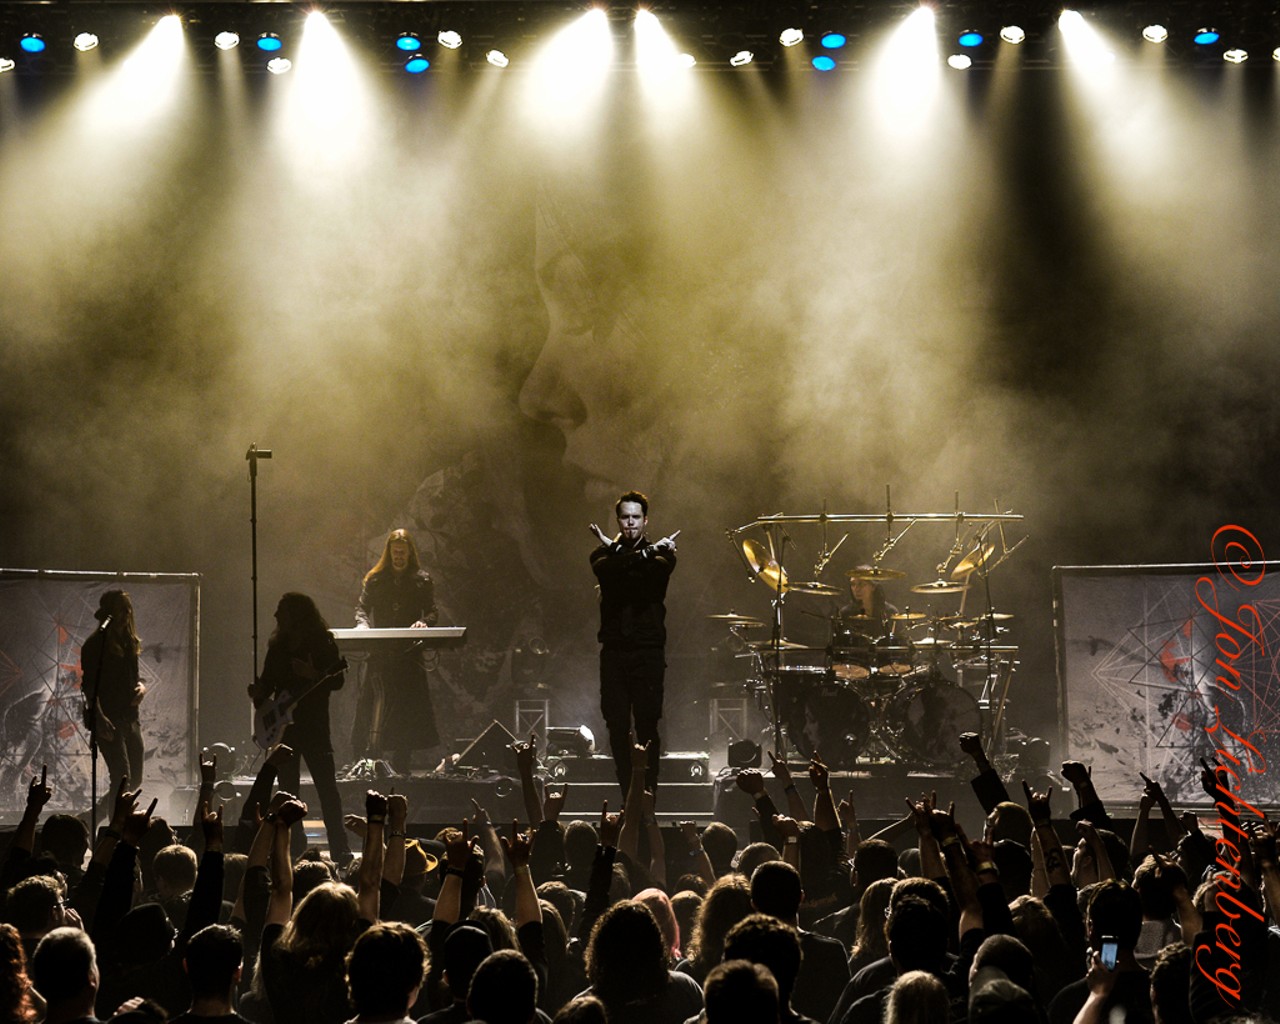 PHOTOS: Dragonforce and Kamelot performing at the Agora Theater